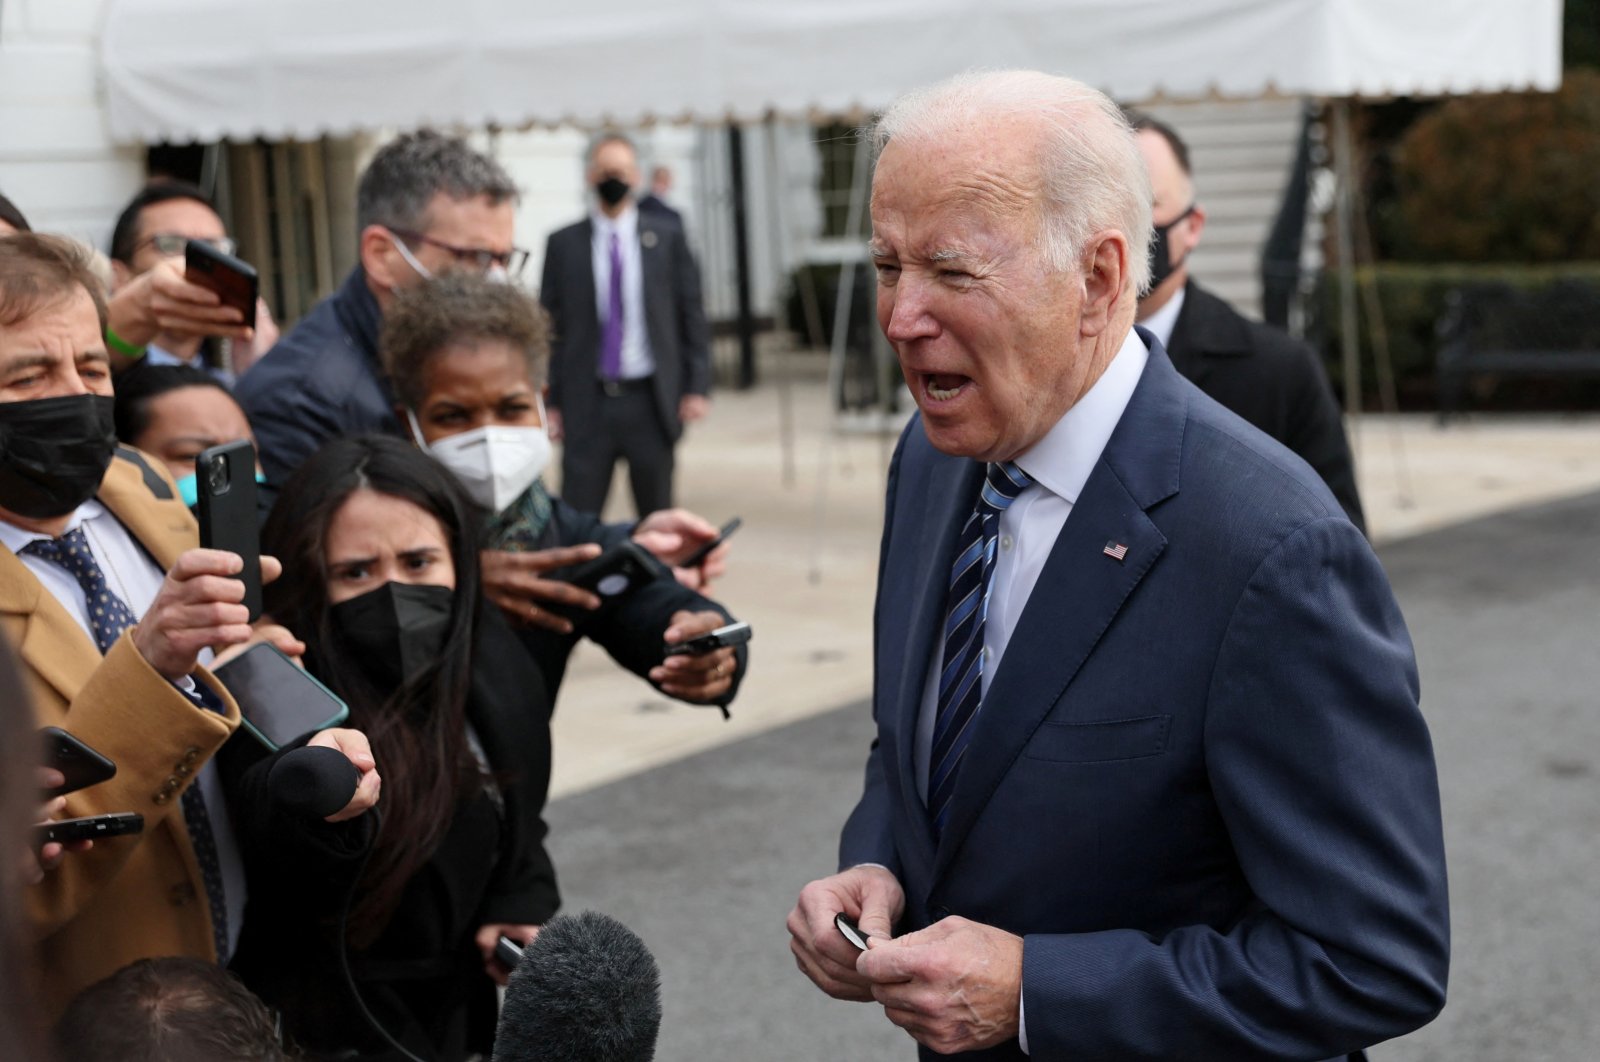 U.S. President Joe Biden speaks to the news media about the situation in Ukraine before boarding Marine One for travel to Ohio from the South Lawn of the White House in Washington, U.S., Feb. 17, 2022. (Reuters Photo)